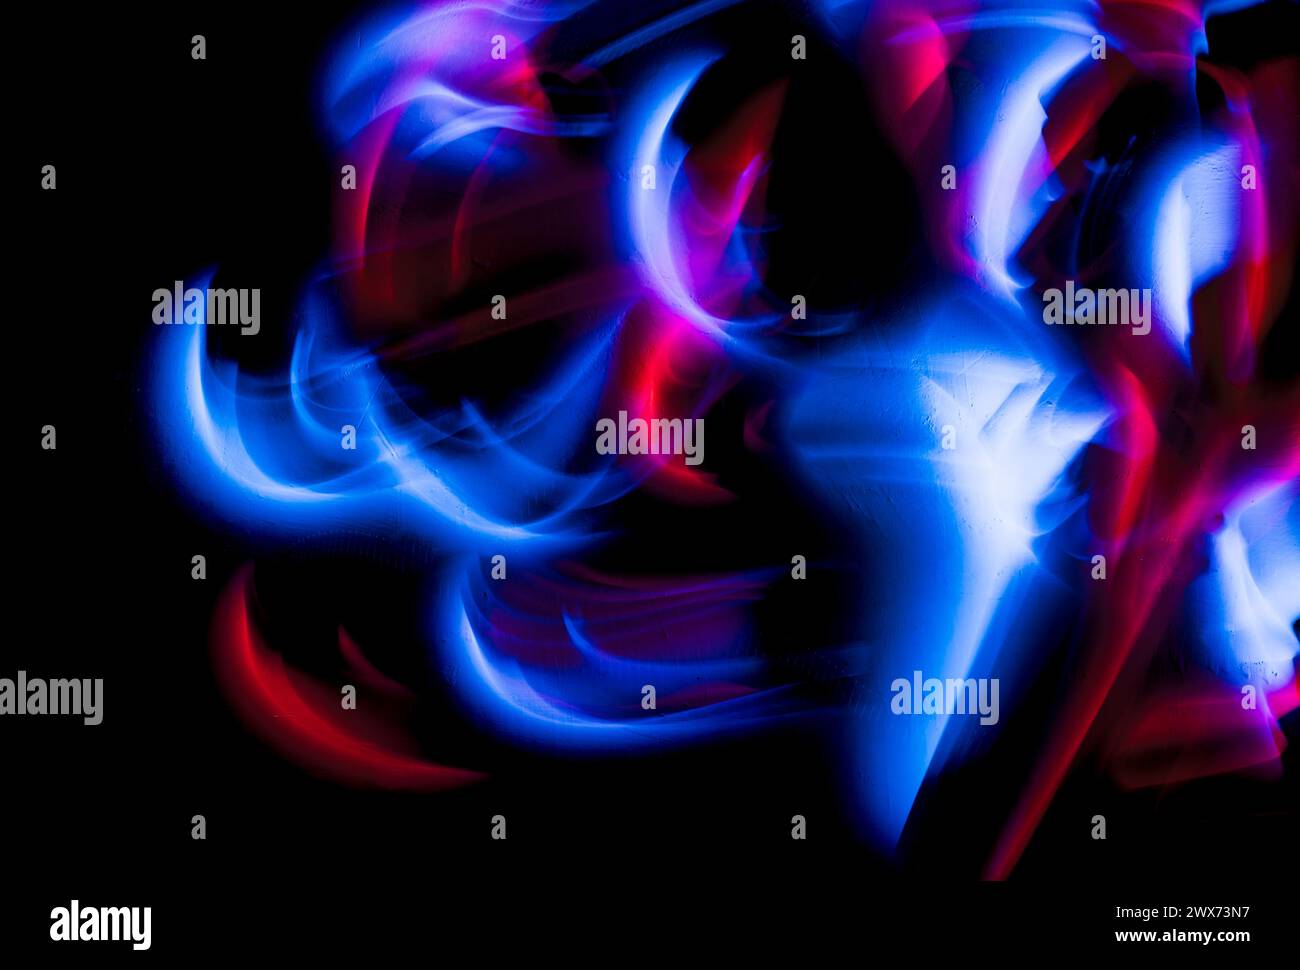 Abstract irregular blue and red lights on black background. Long exposure. Light painting photography. Stock Photo